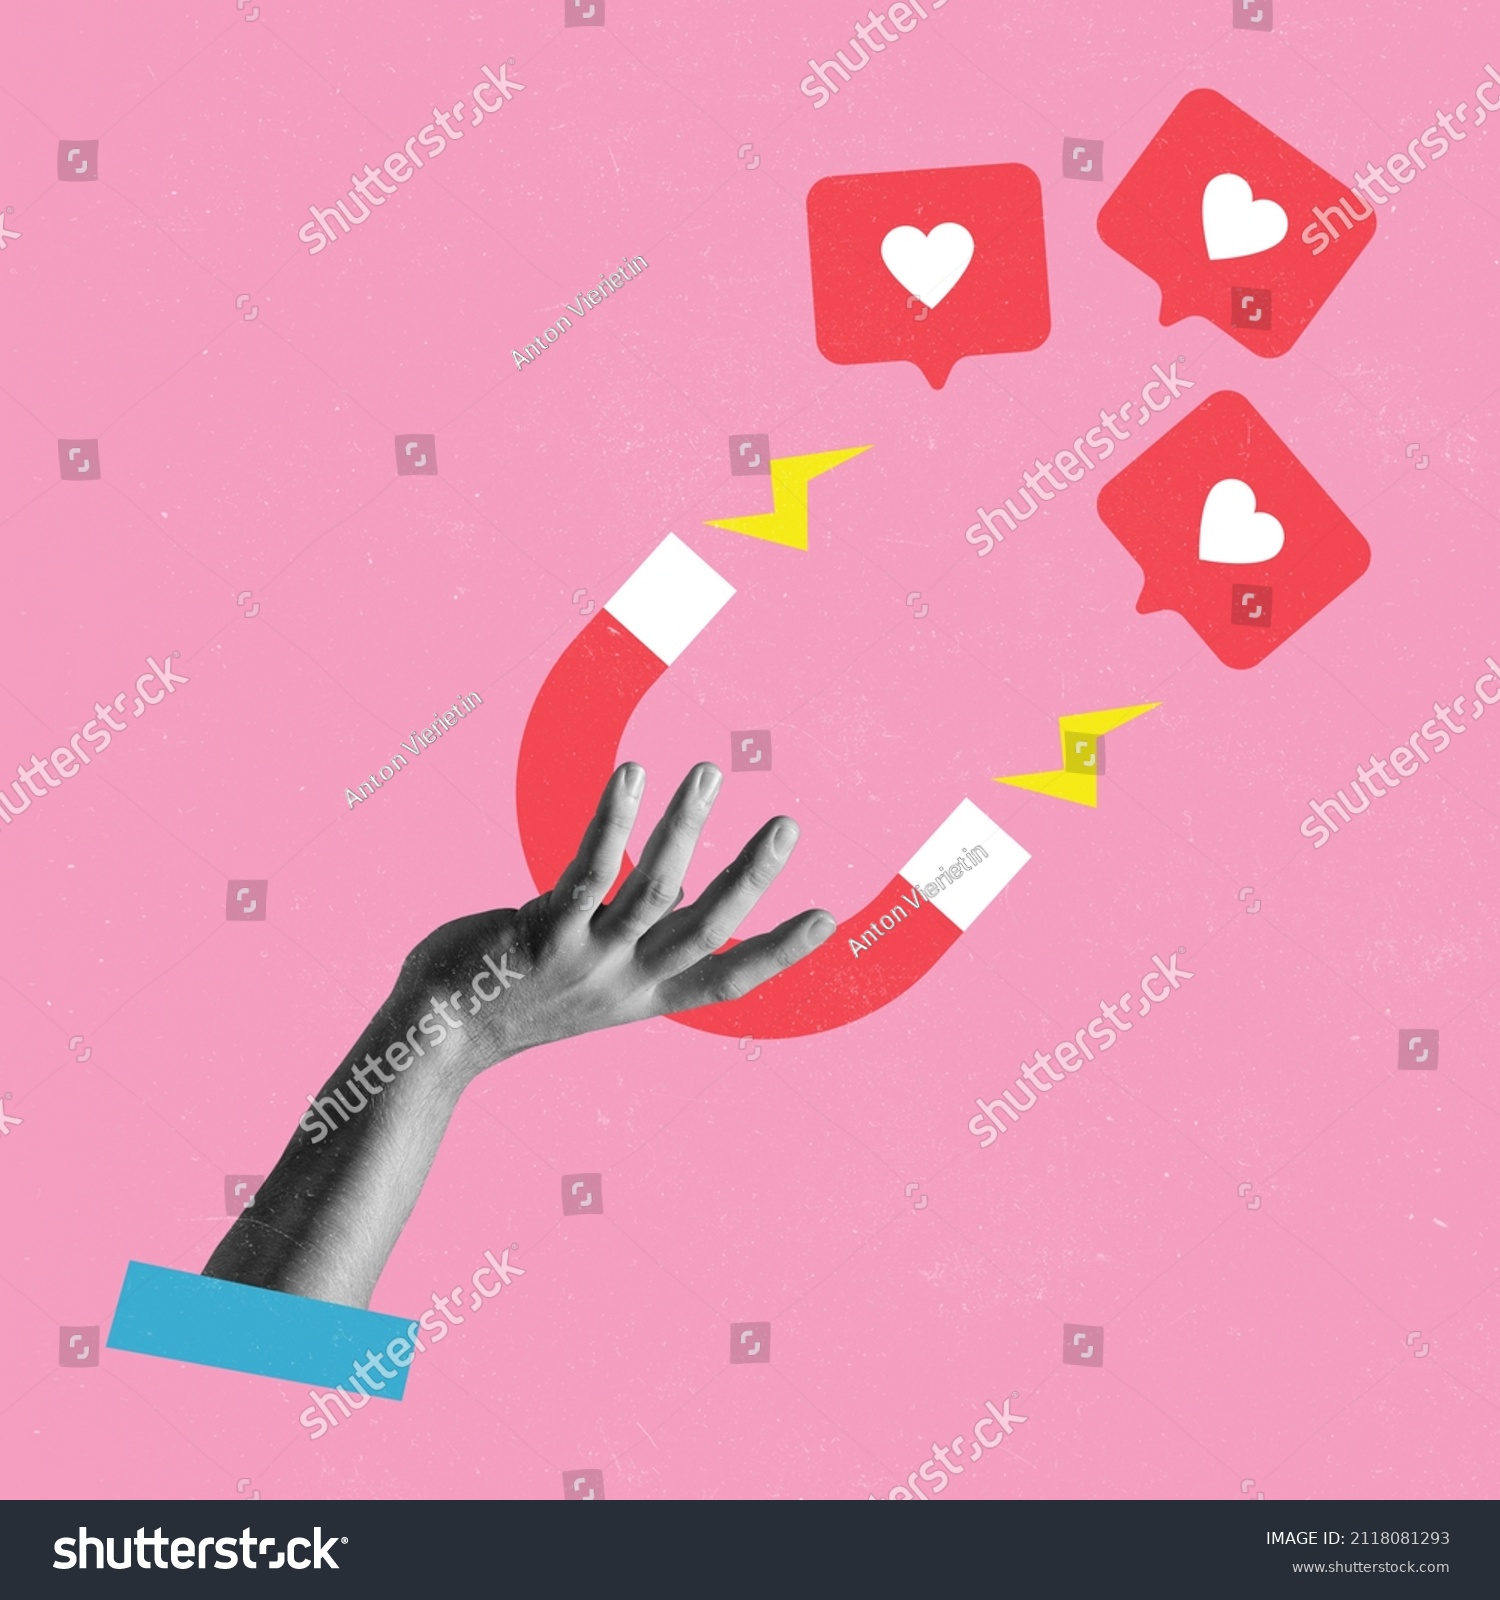 Conemporary art collage with female hand holding magnet and magnetizing likes symbol isolated over pink background. Concept of social media, influence, popularity, modern lifestyle and ad #2118081293